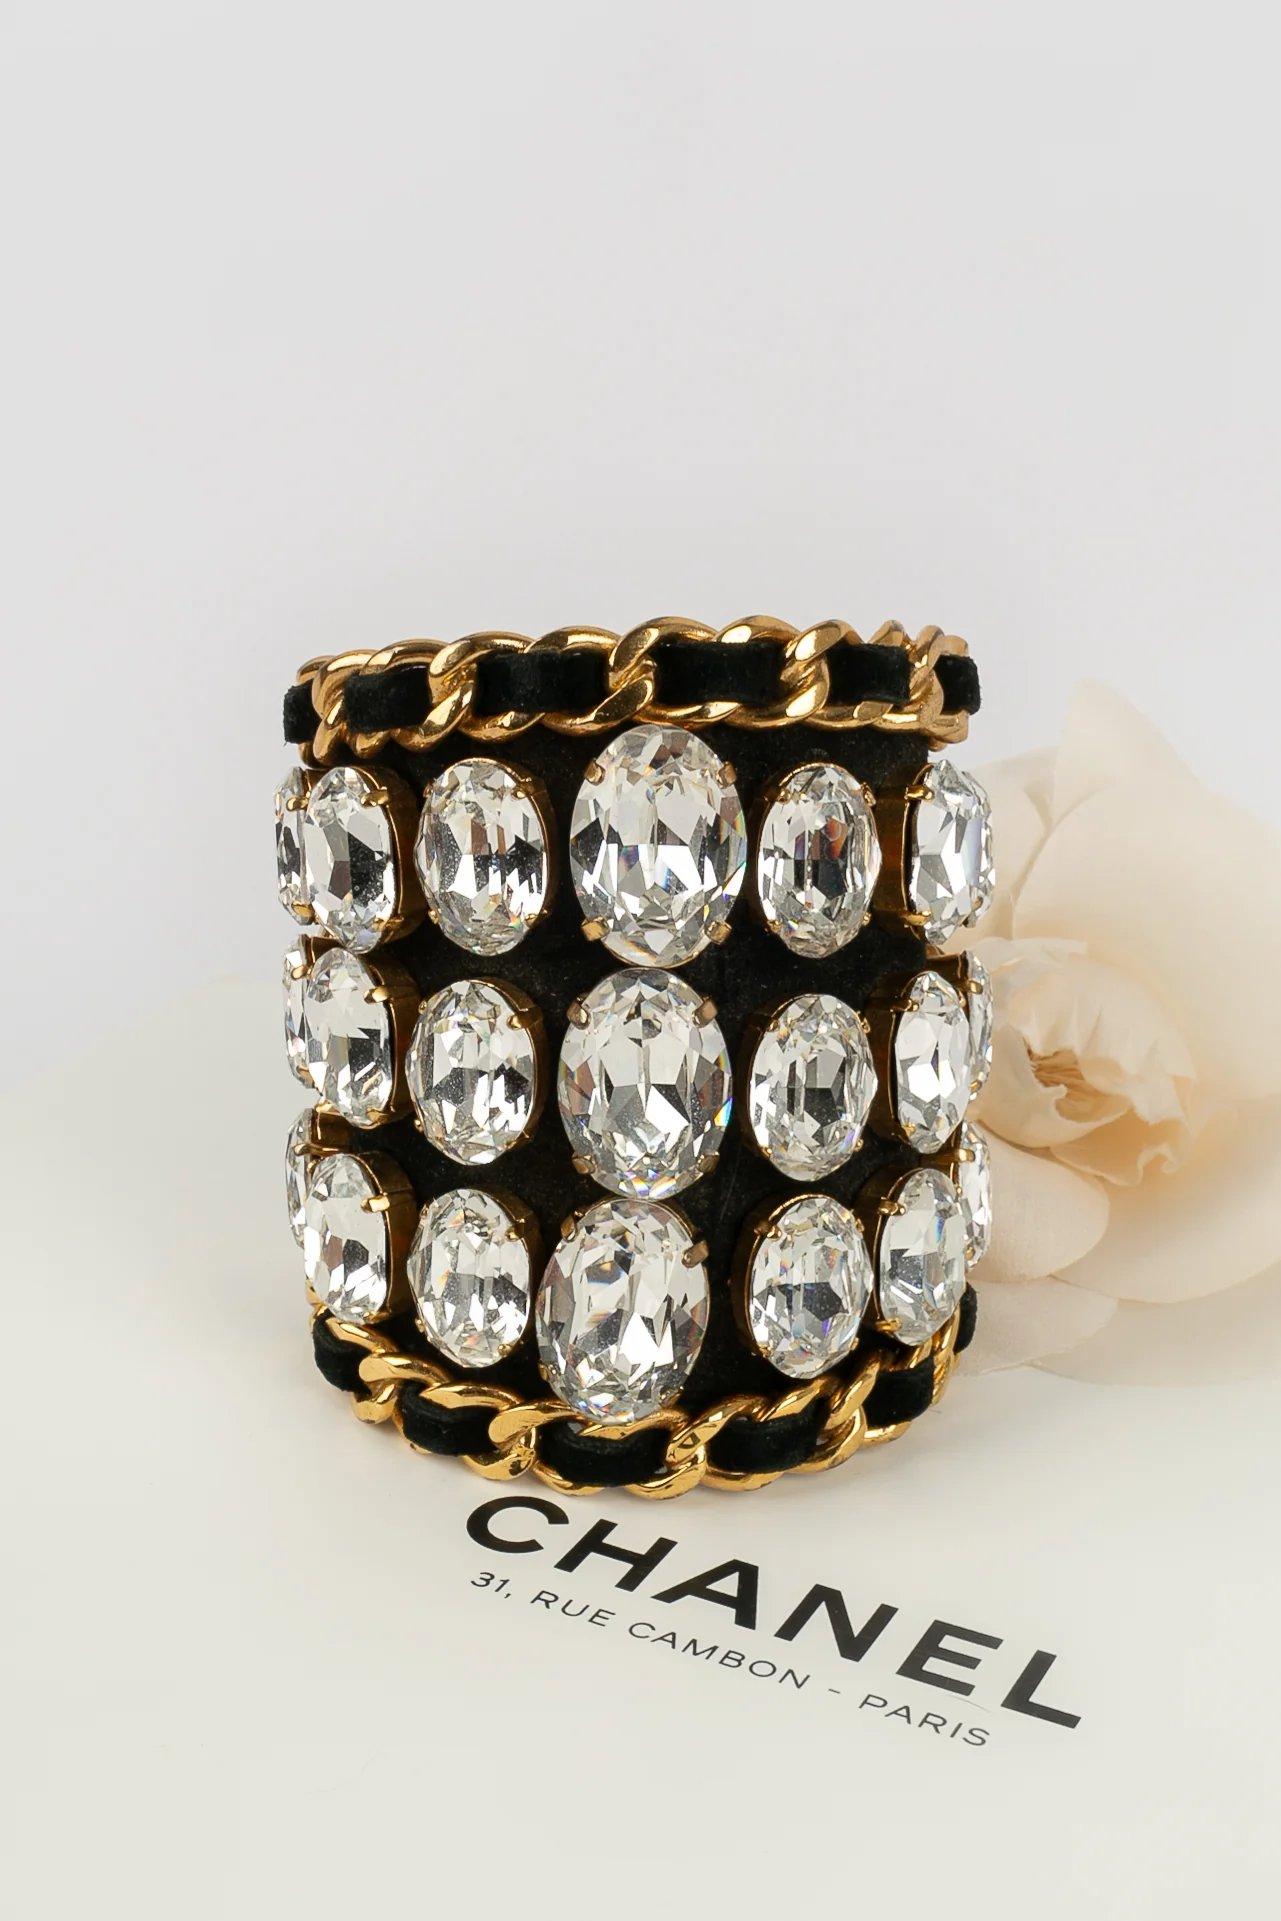 Chanel Cuff Bracelet in Black Leather and Gold Metal with Rhinestones For Sale 2